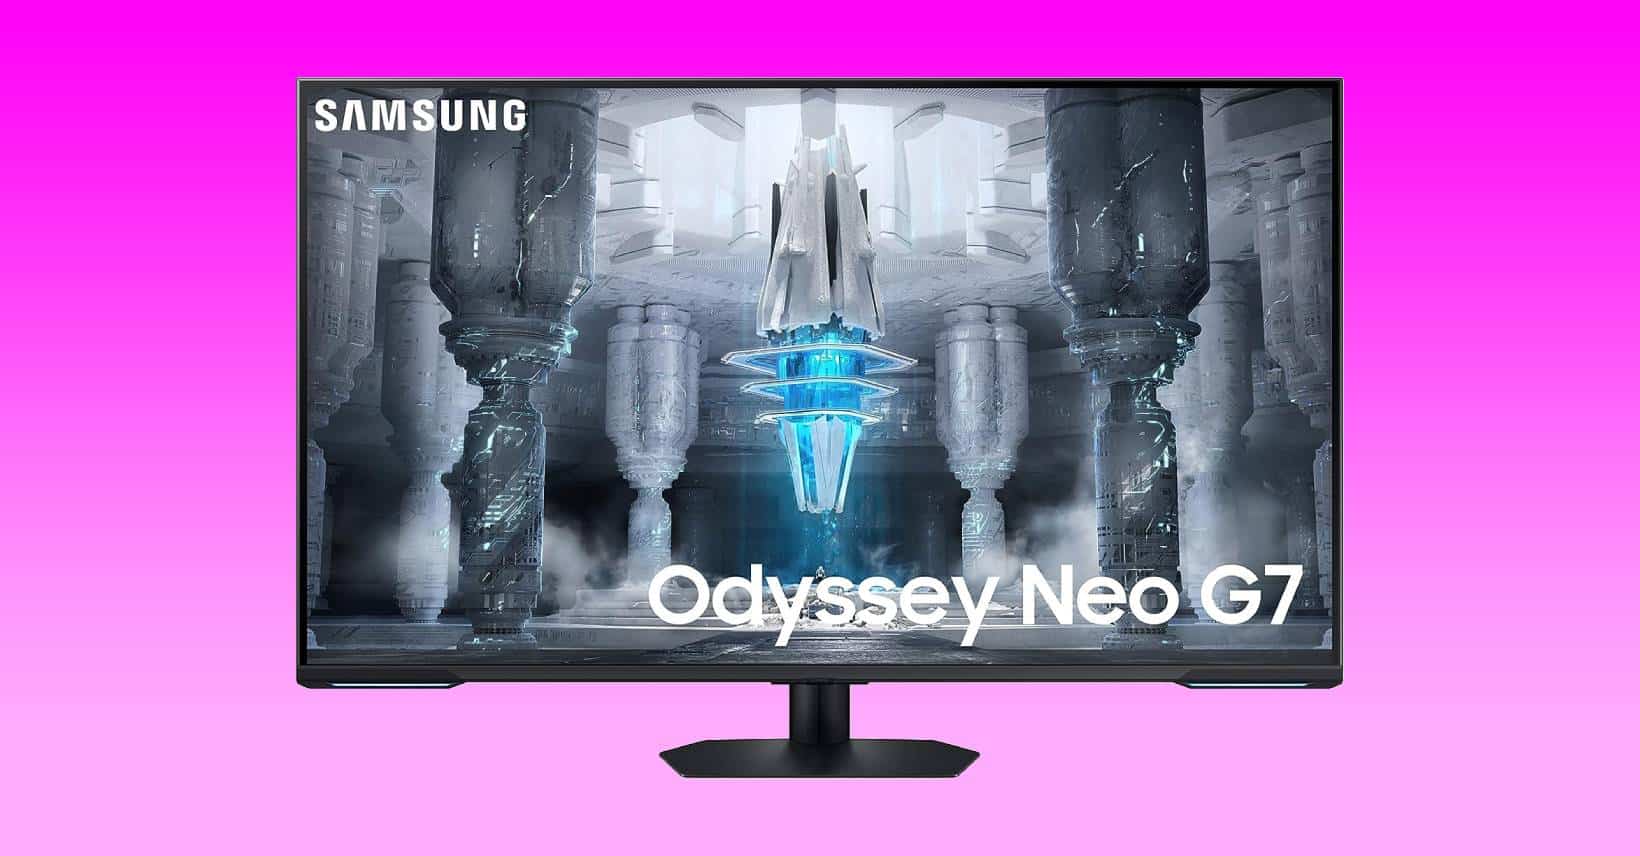 Could this SAMSUNG Odyssey Neo G7 Gaming Monitor deal really be that good?